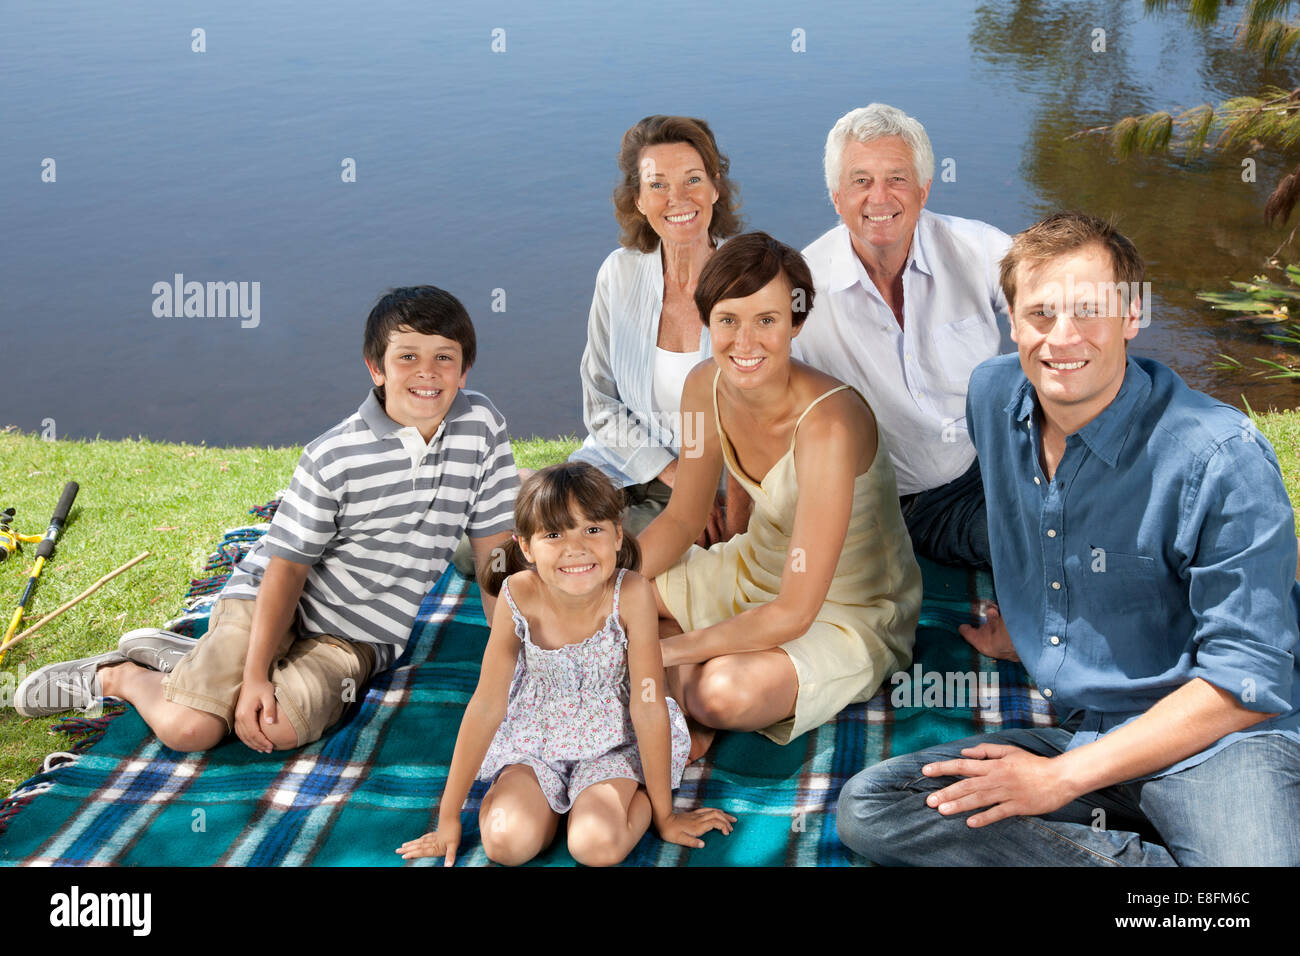 Portrait of a smiling multi-generation family, Cape Town, Western Cape, South Africa Stock Photo